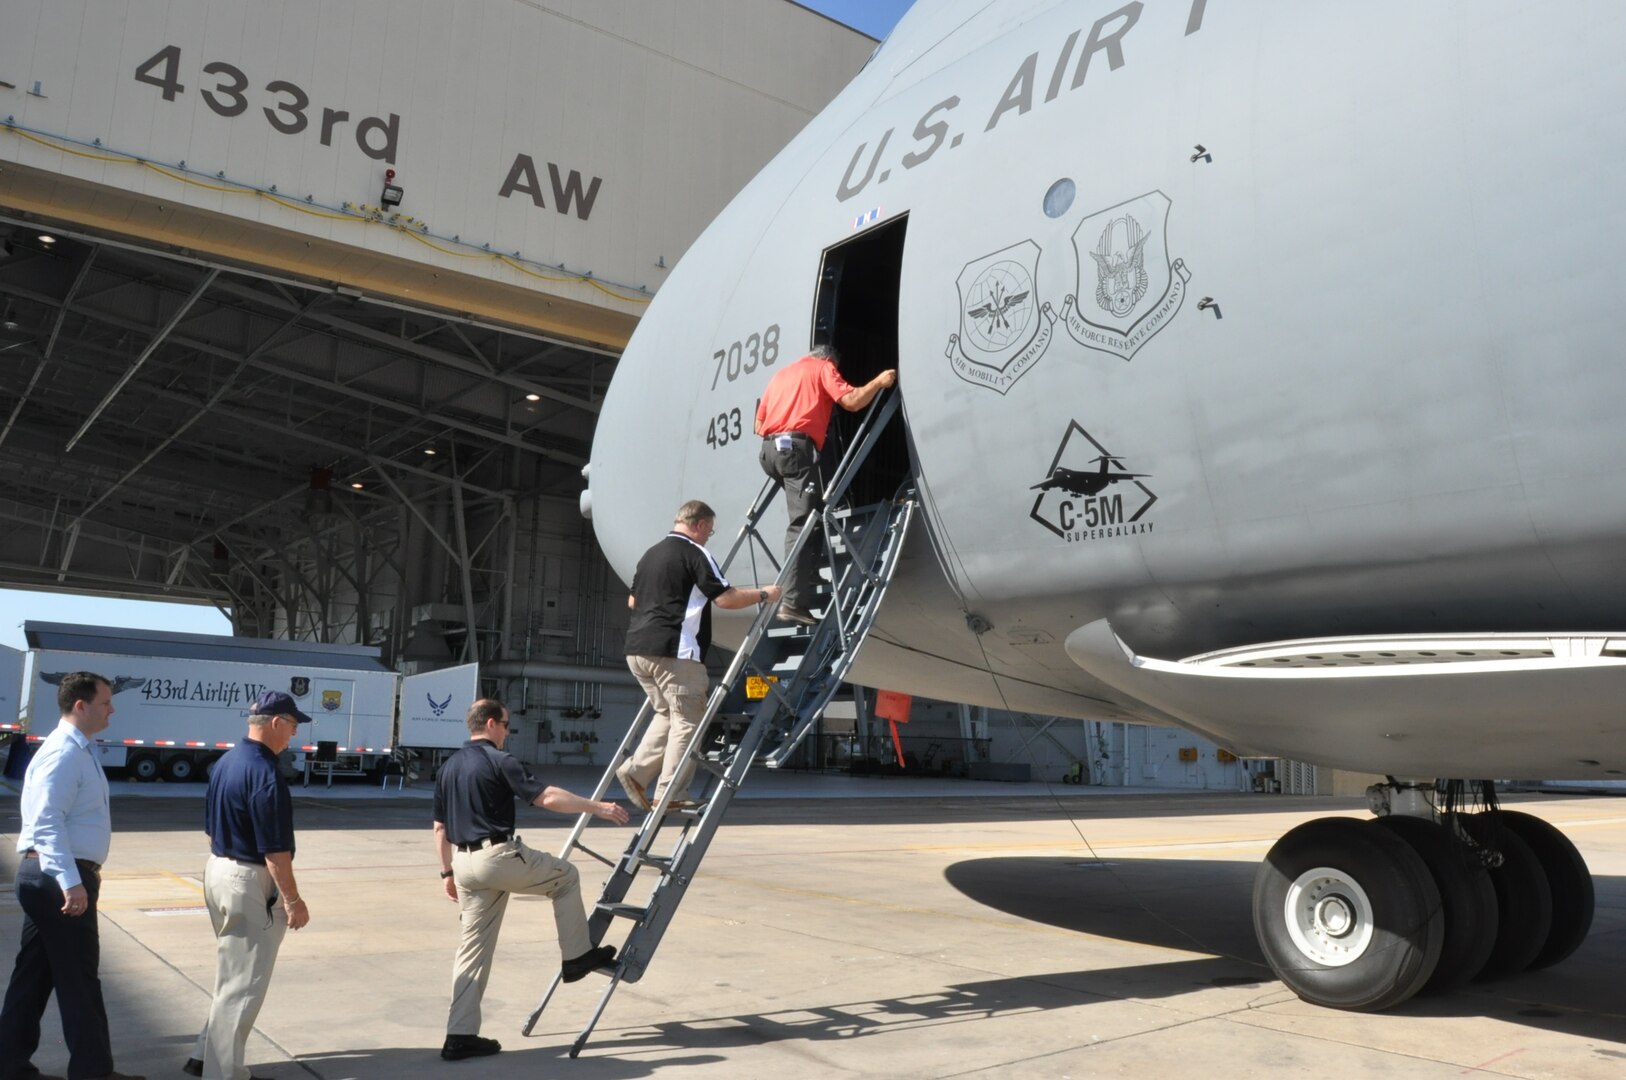 A group of 10 433rd Airlift Wing honorary commanders make their way up the stairs into the C-5M Super Galaxy during the 433rd Maintenance Group Honorary Commander’s Tour July 15, 2017.  The tour allows the community leaders to see the aircraft up close and learn about the maintainer’s responsibilities associated with the largest aircraft in the U.S. Air Force’s fleet.  (U.S. Air Force photo/Senior Airman Bryan Swink)